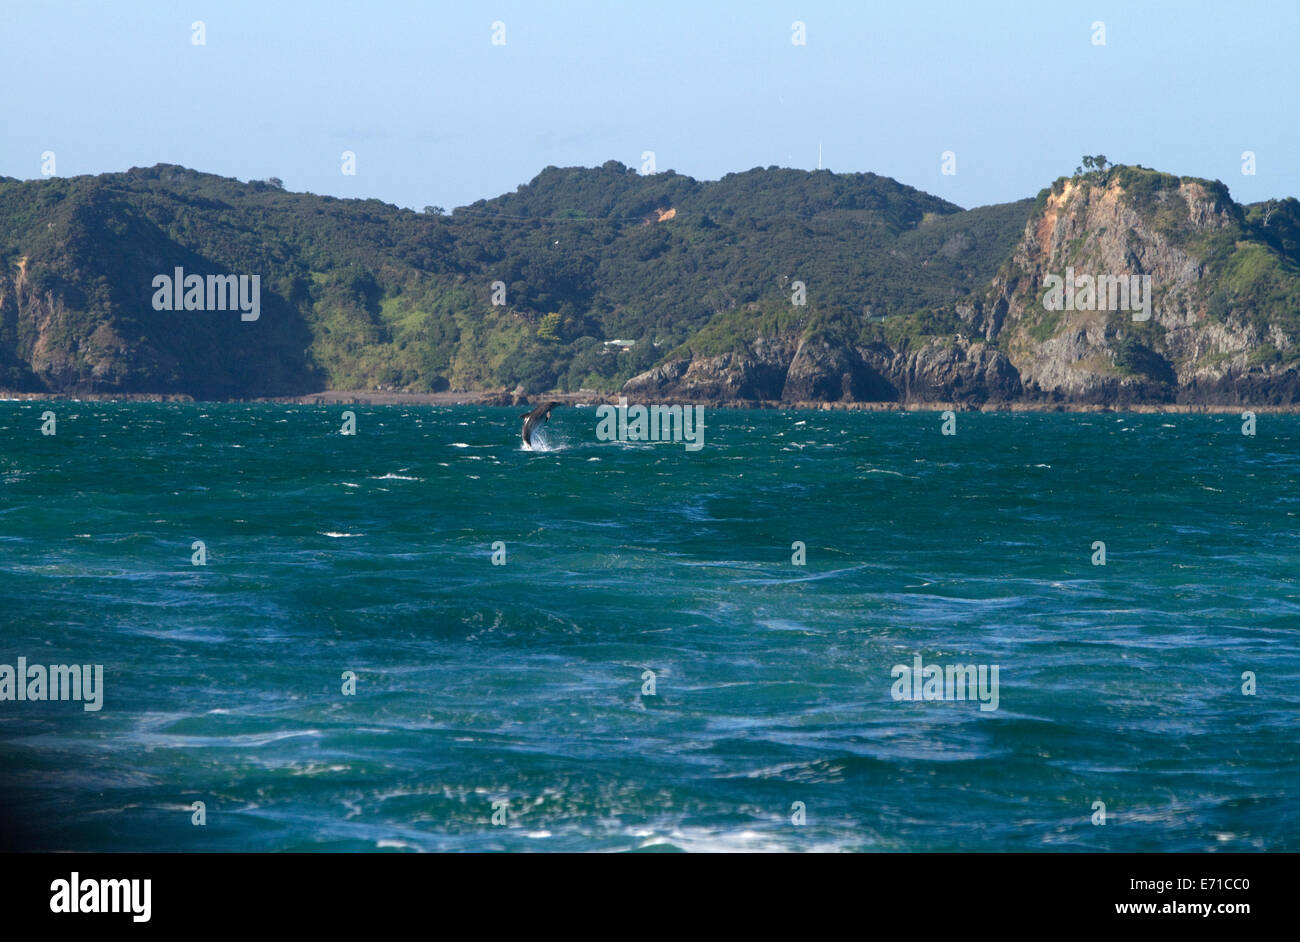 Dolphin in the Bay of Islands, North Island, New Zealand. Stock Photo